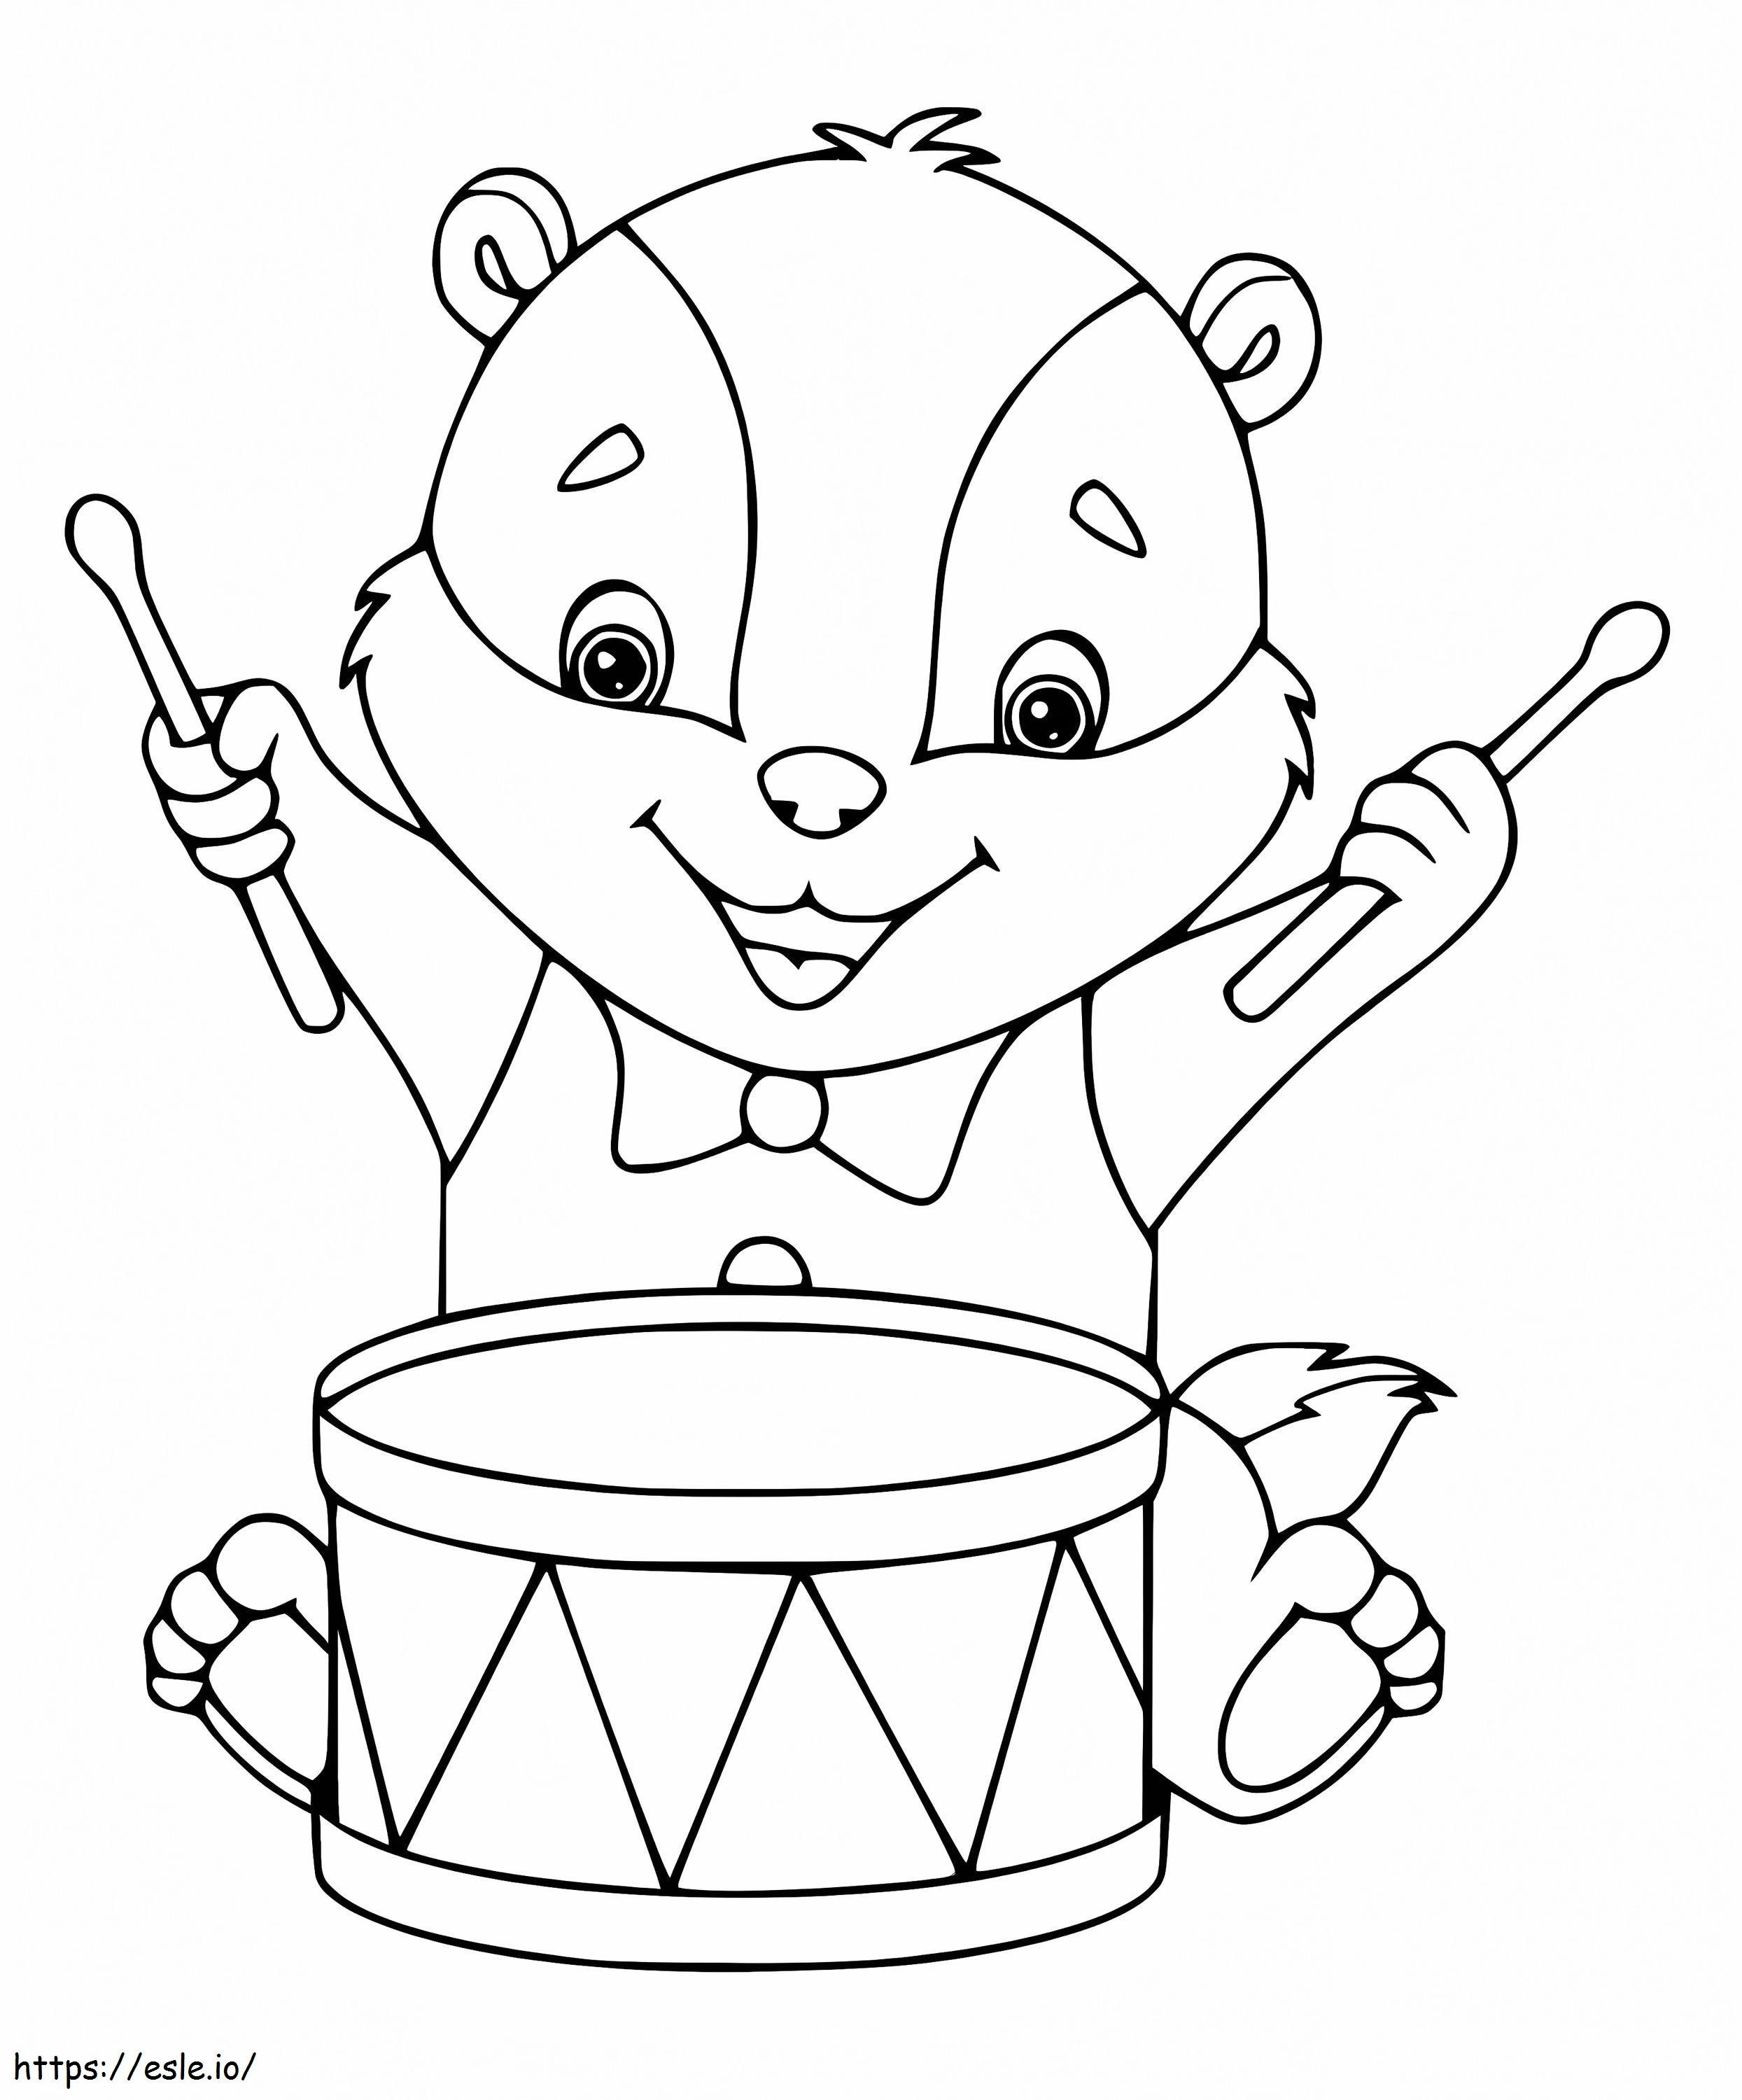 Badger Playing Drum coloring page